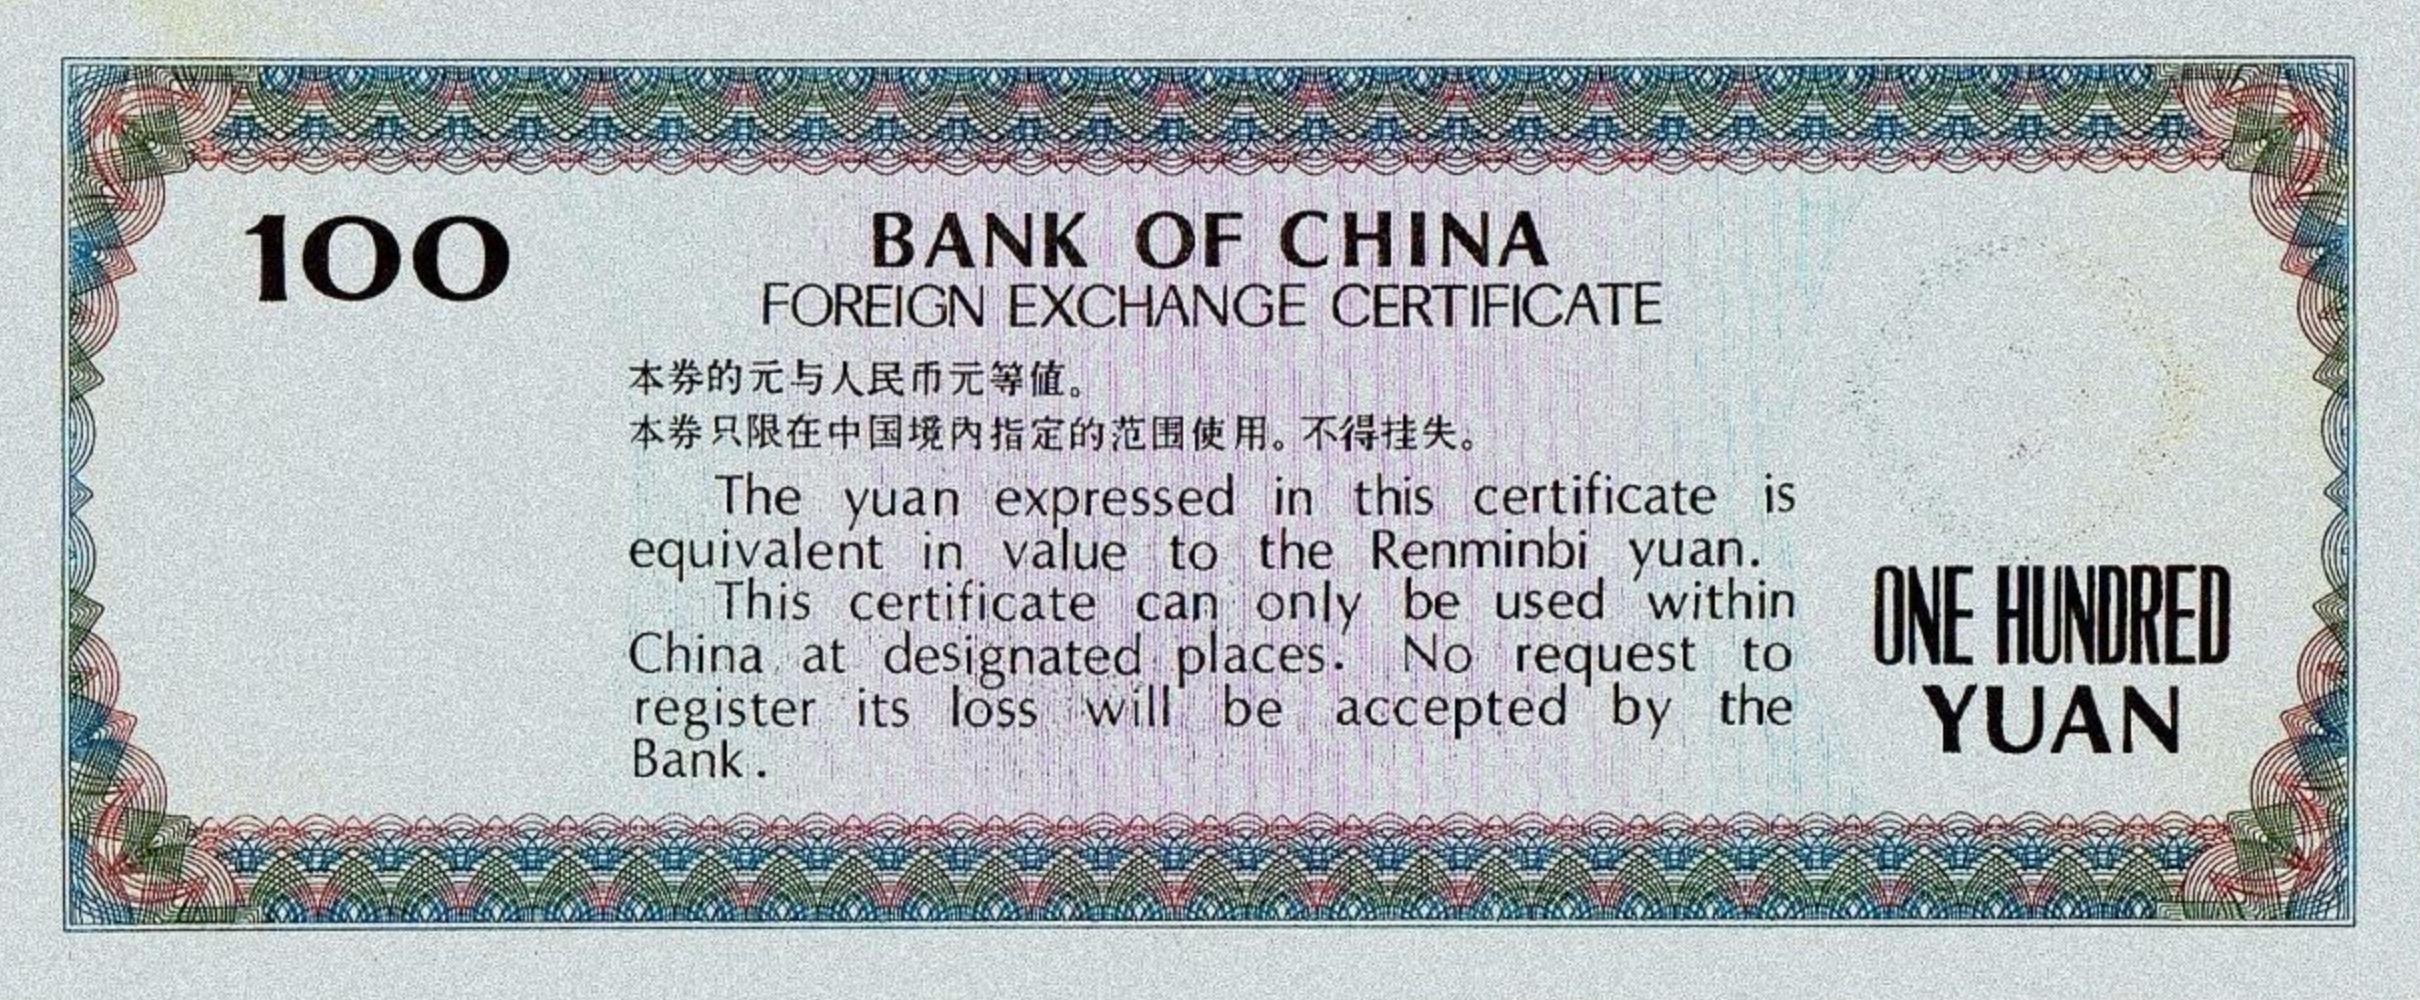 Foreign Exchange Certificate.